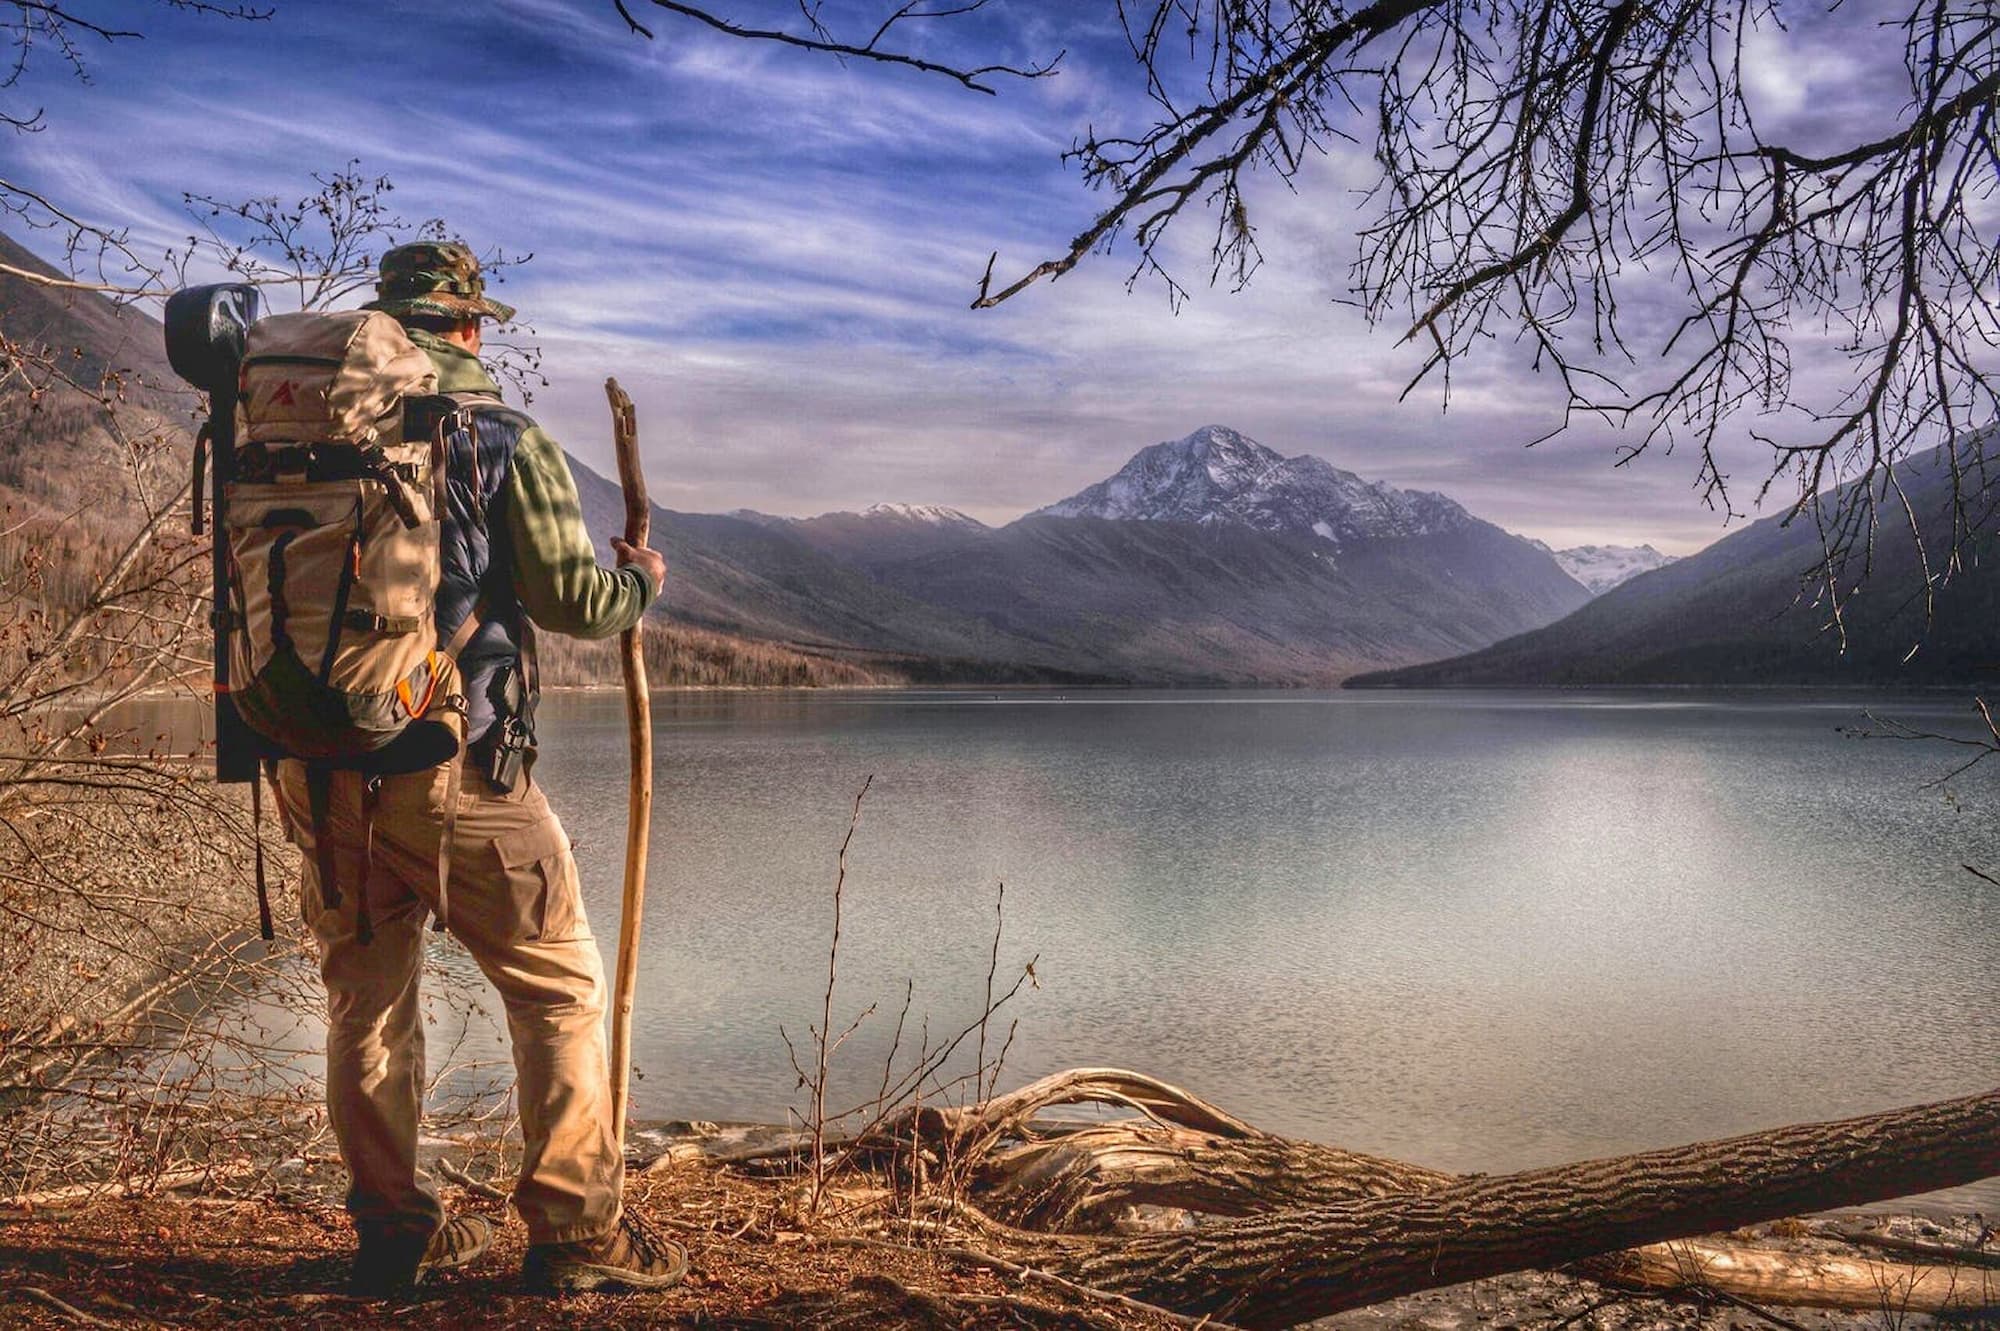 Hiker with camo backpack and wooden walking stick standing in fron of lake below a snowy mountain.